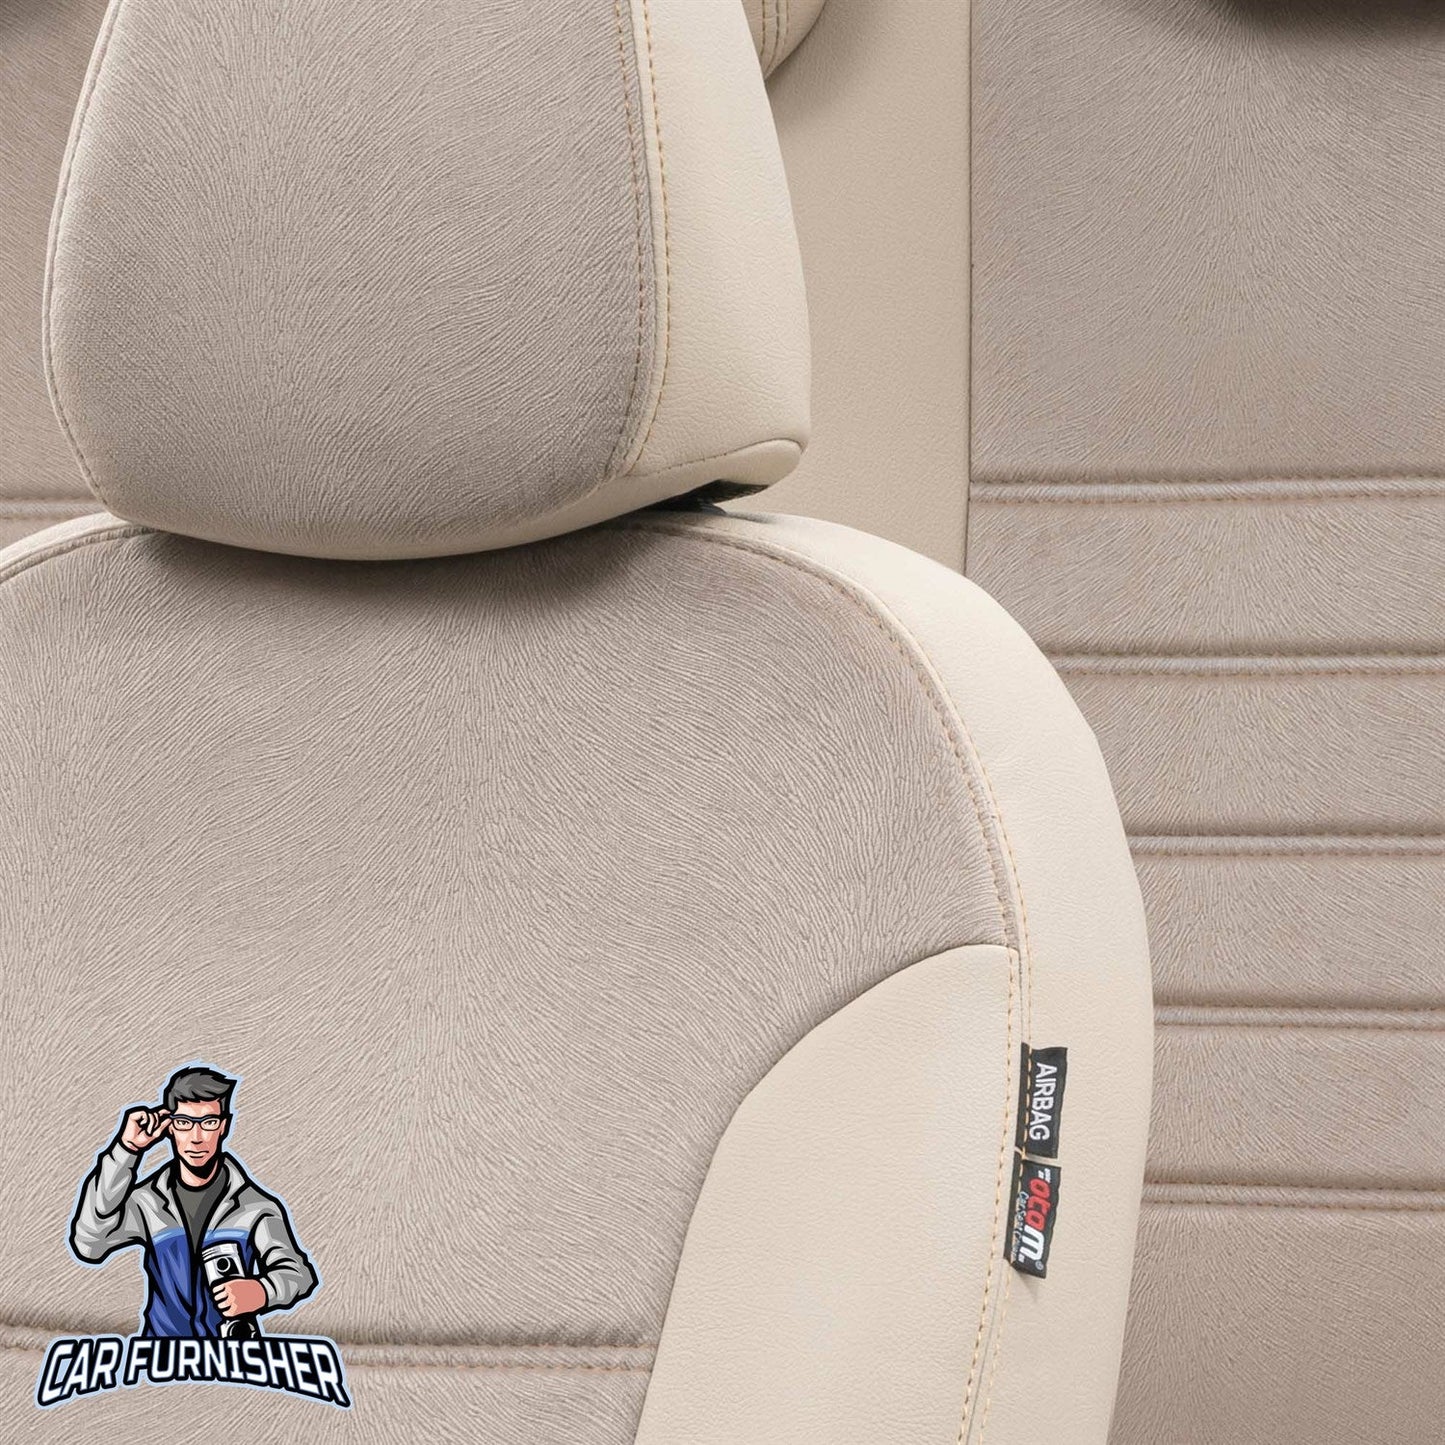 Volkswagen Tiguan Seat Cover London Foal Feather Design Beige Leather & Foal Feather